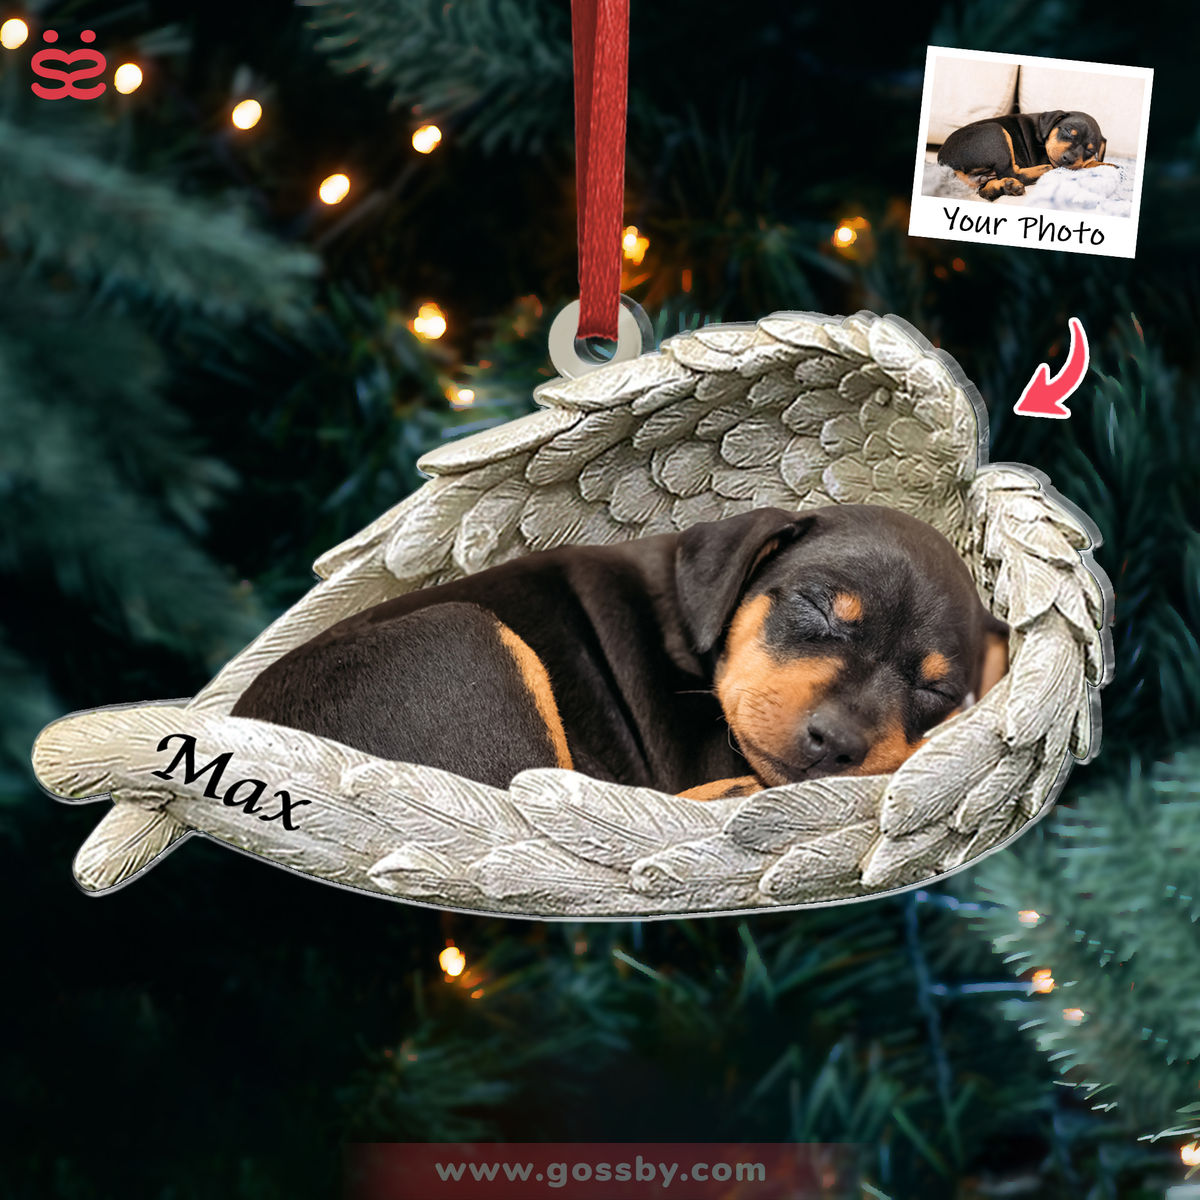 Dog Acrylic Ornament - Dog Lovers - Sleeping Pet Within Angel Wings - Customized Your Photo Ornament, Custom Photo Gifts, Christmas Gifts_1